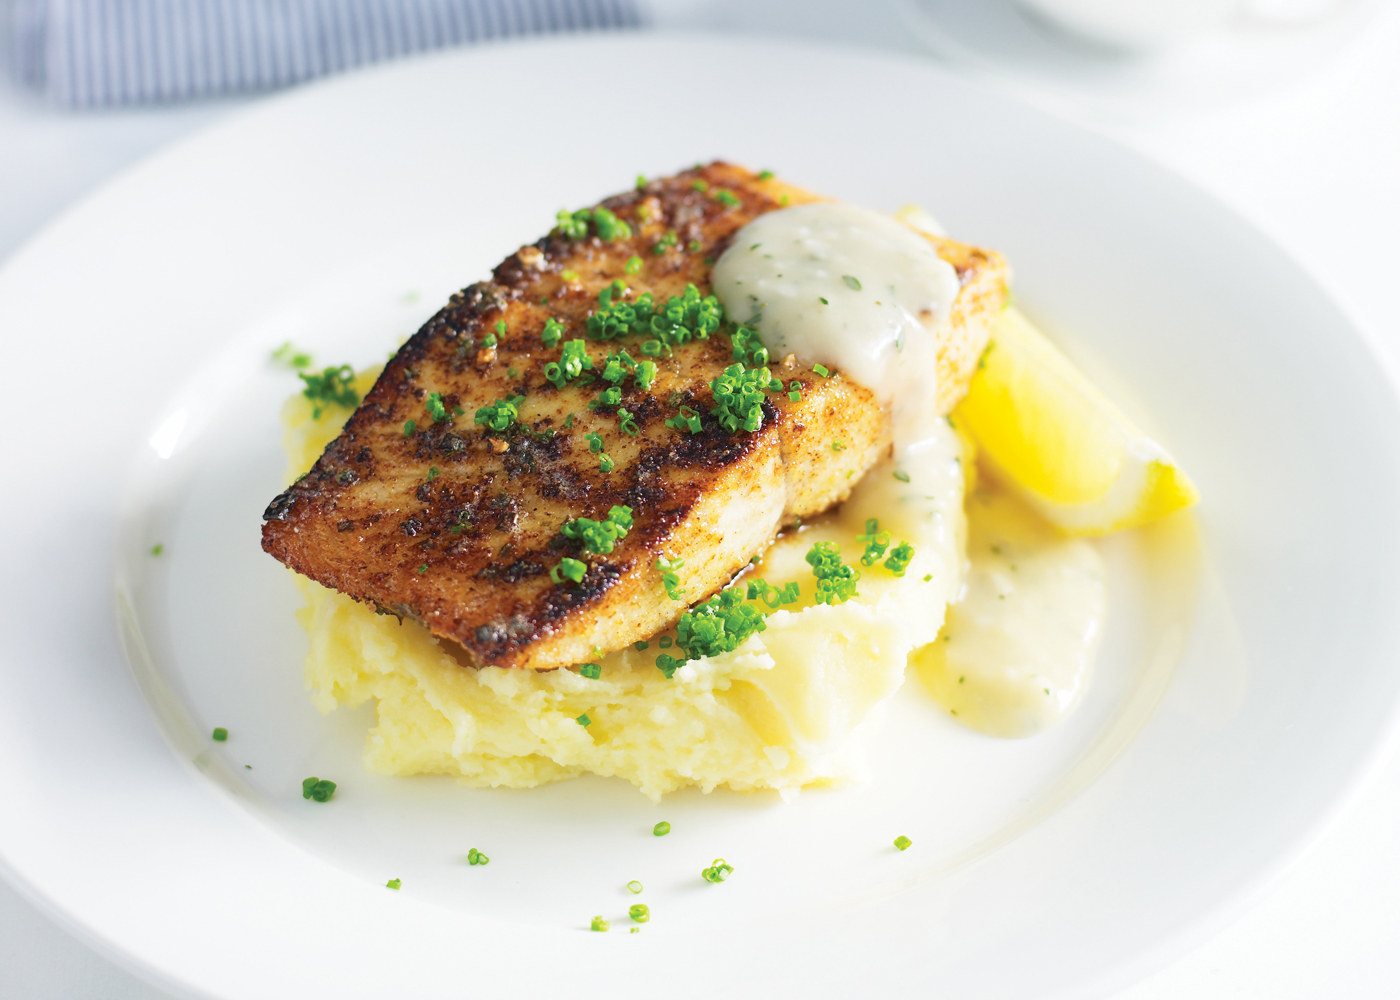 https://www.foodwise.com.au/wp-content/uploads/2012/09/BACKGROUND-Pan-Fried-Kingfish-with-Creamy-Mash-Potatoes-and-Pan-Gravy.jpg